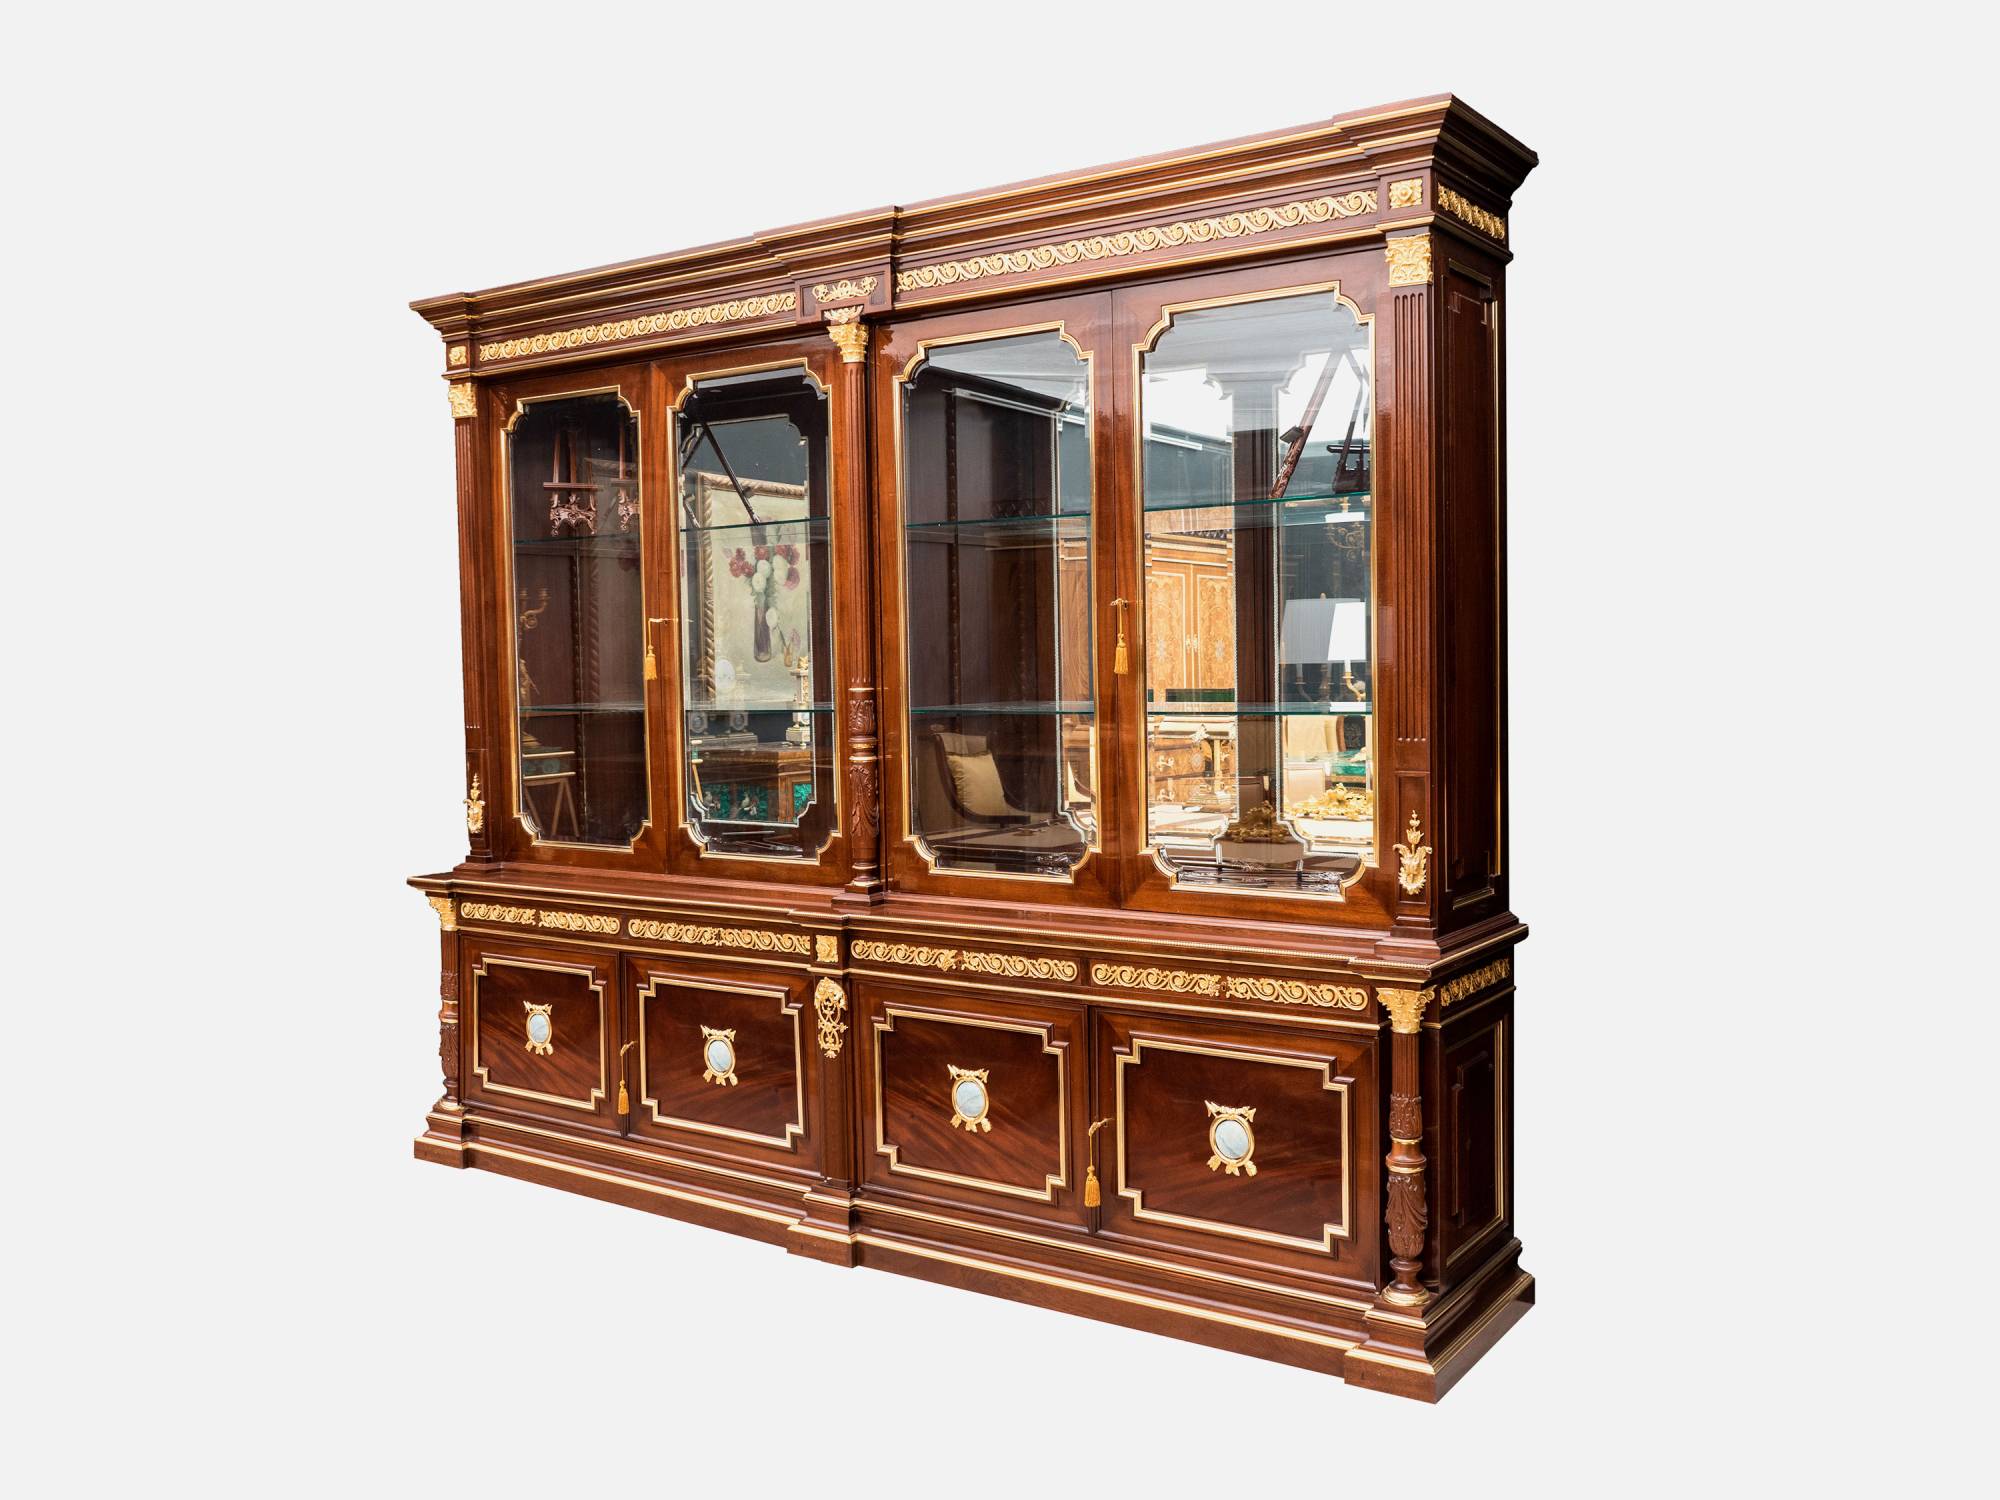 ART. 708-2 – C.G. Capelletti Italian Luxury Classic Showcases and Bookcases. Transform your space with sophisticated made in italy classic interior design.